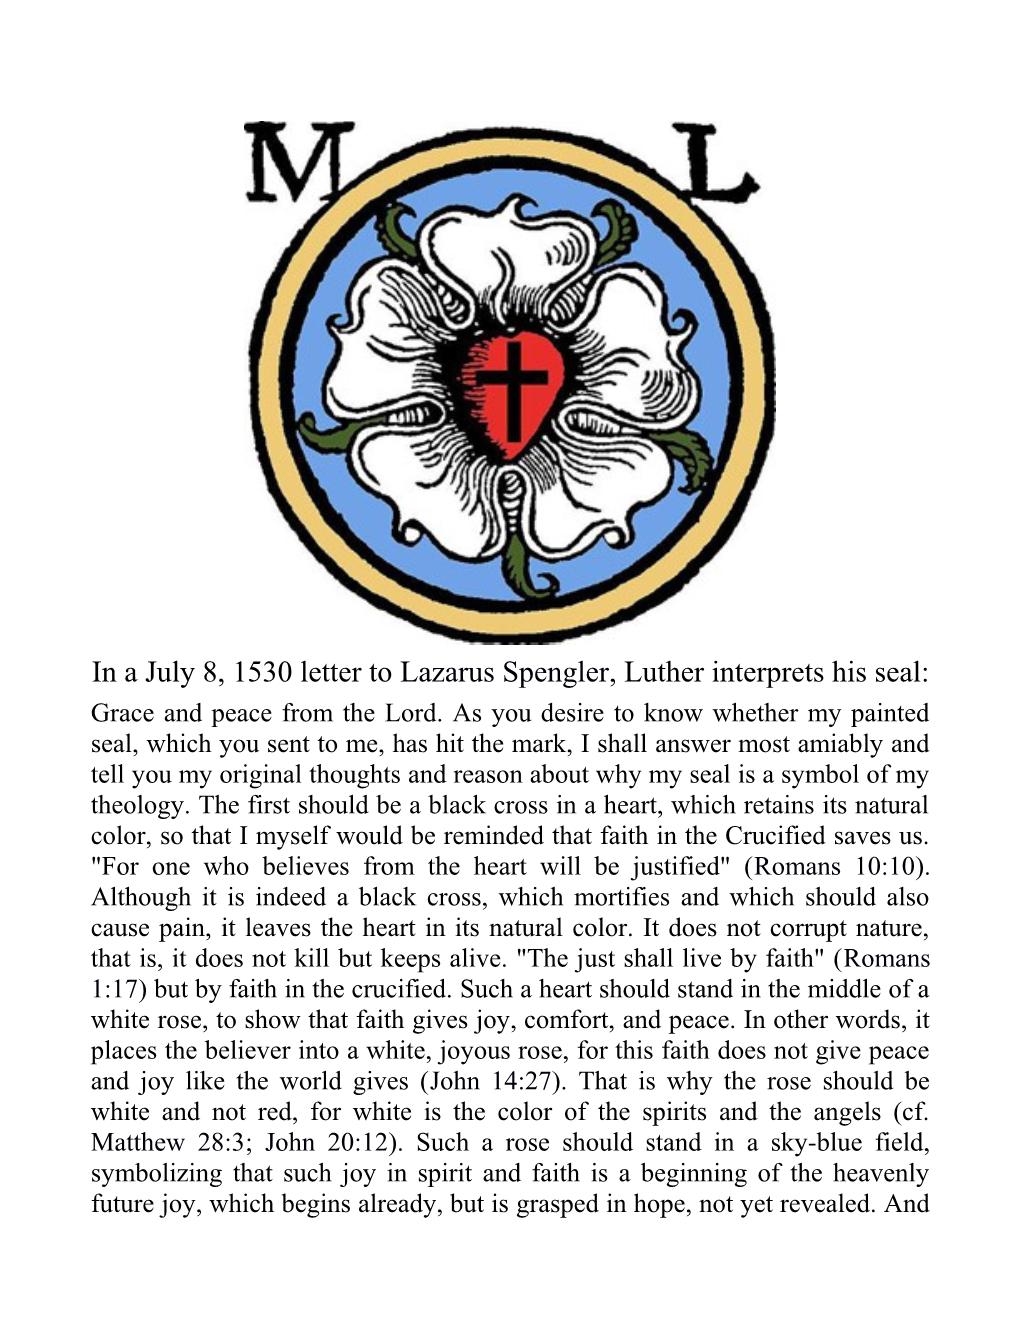 In a July 8, 1530 Letter to Lazarus Spengler, Luther Interprets His Seal